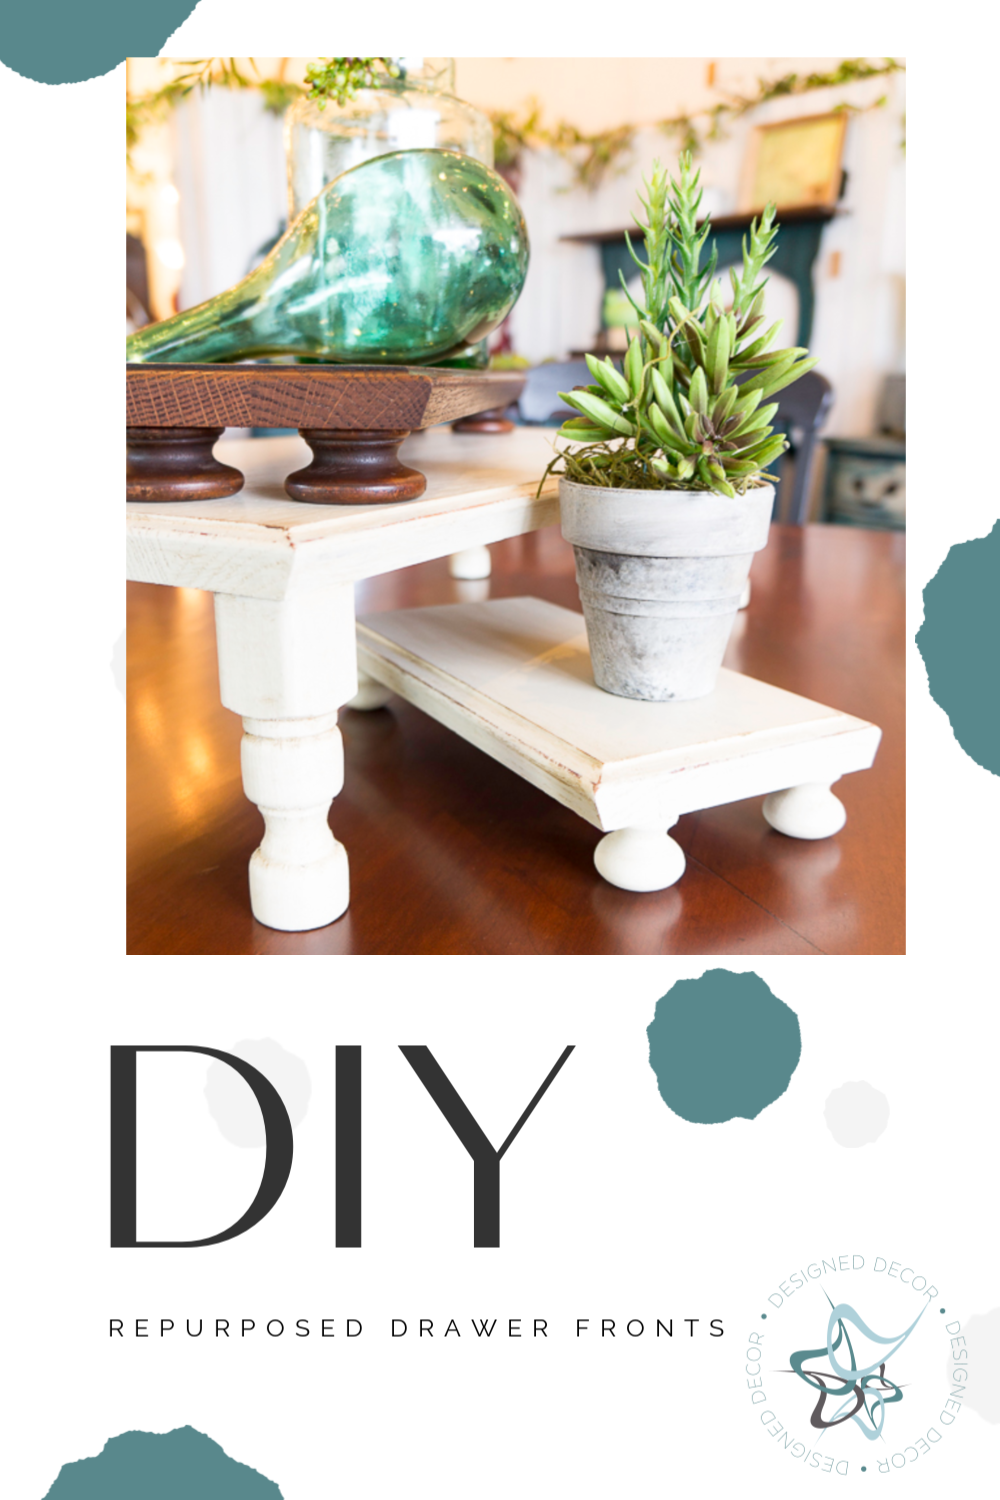 Repurposed Drawer Fronts into Display Riser -   18 home accessories DIY website ideas